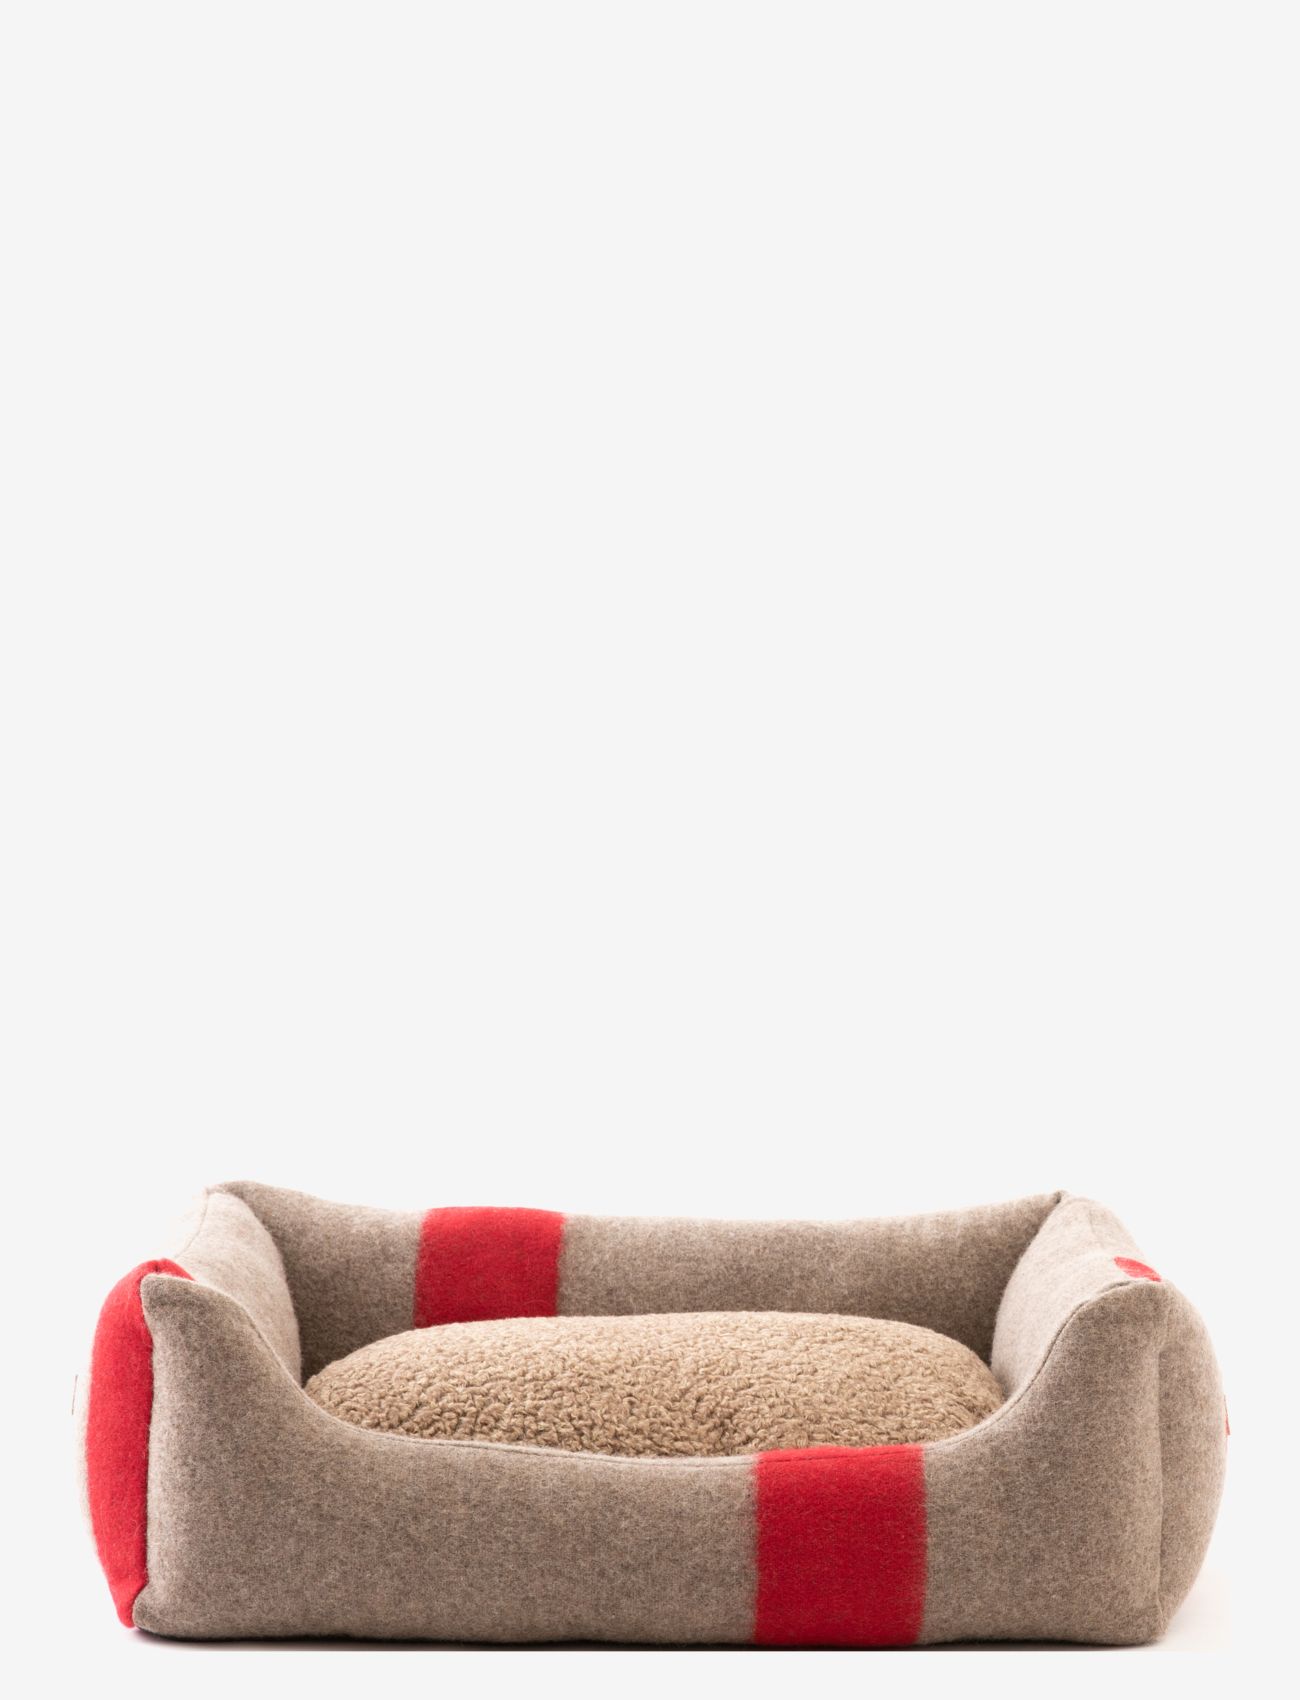 2.8 Design for Dogs - HENRI RECYCLED WOOL - hundebetten - red wool - 0